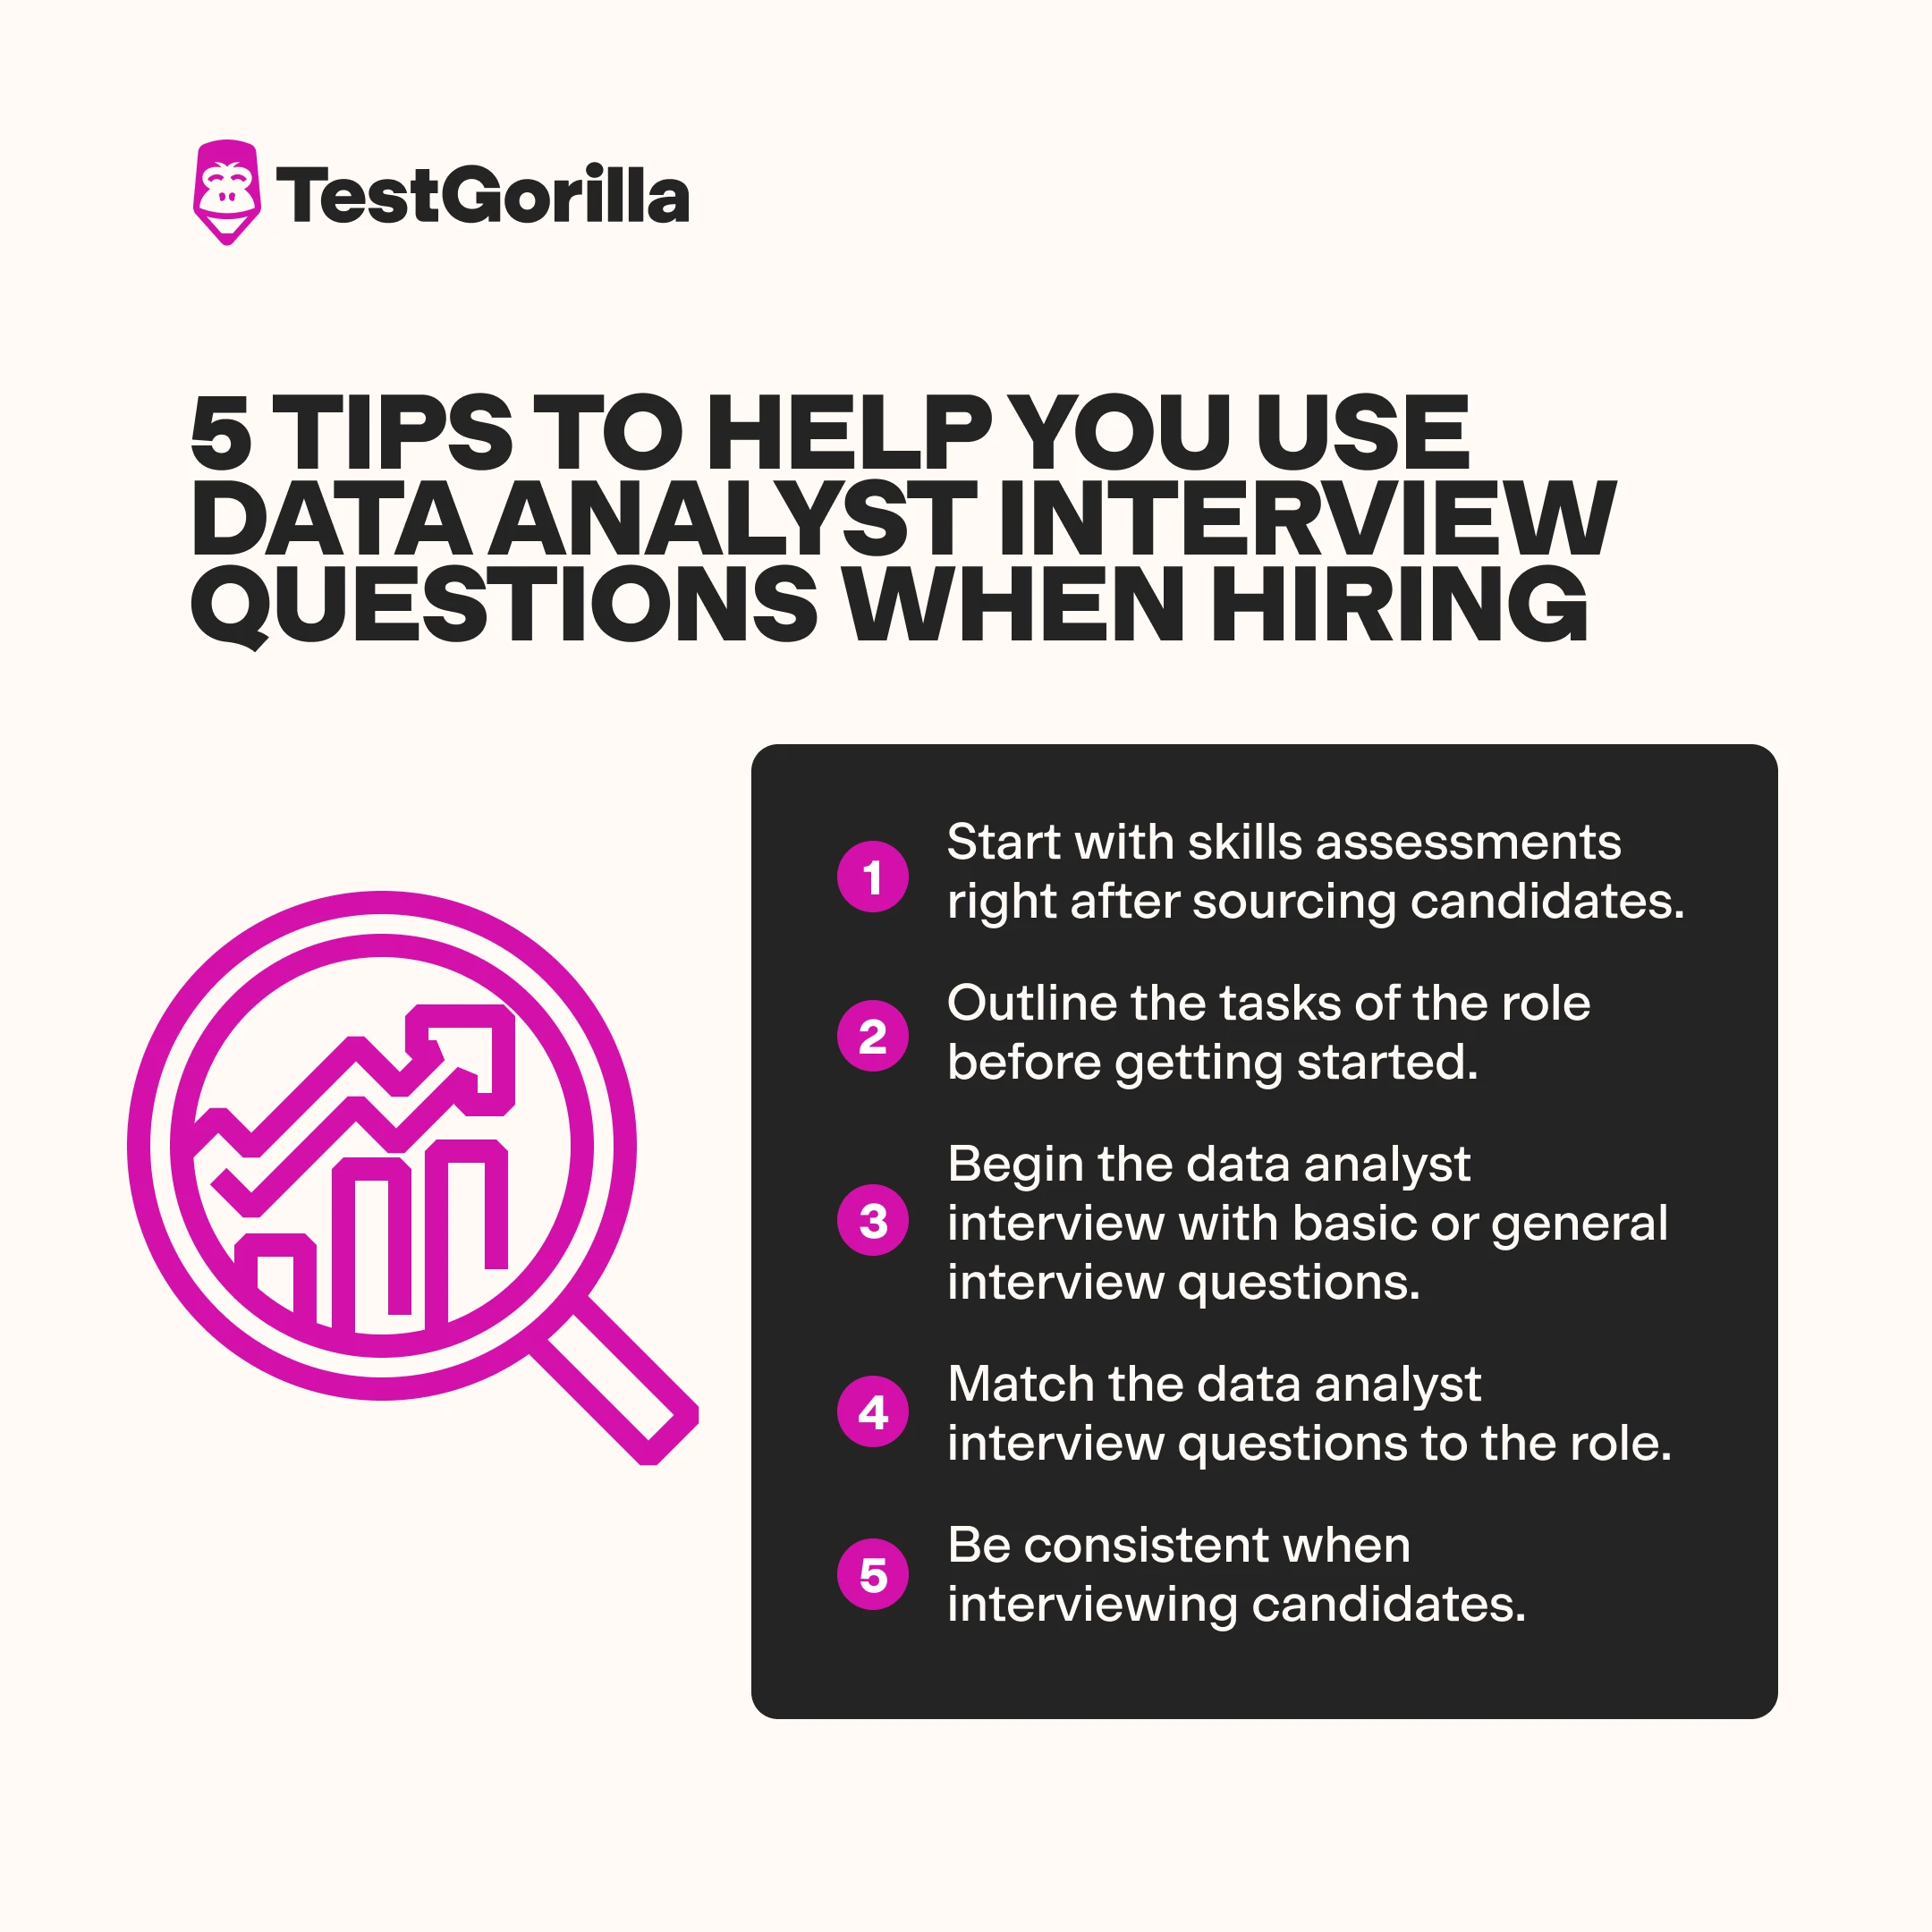 image showing tips to help you use data analyst interview questions when hiring